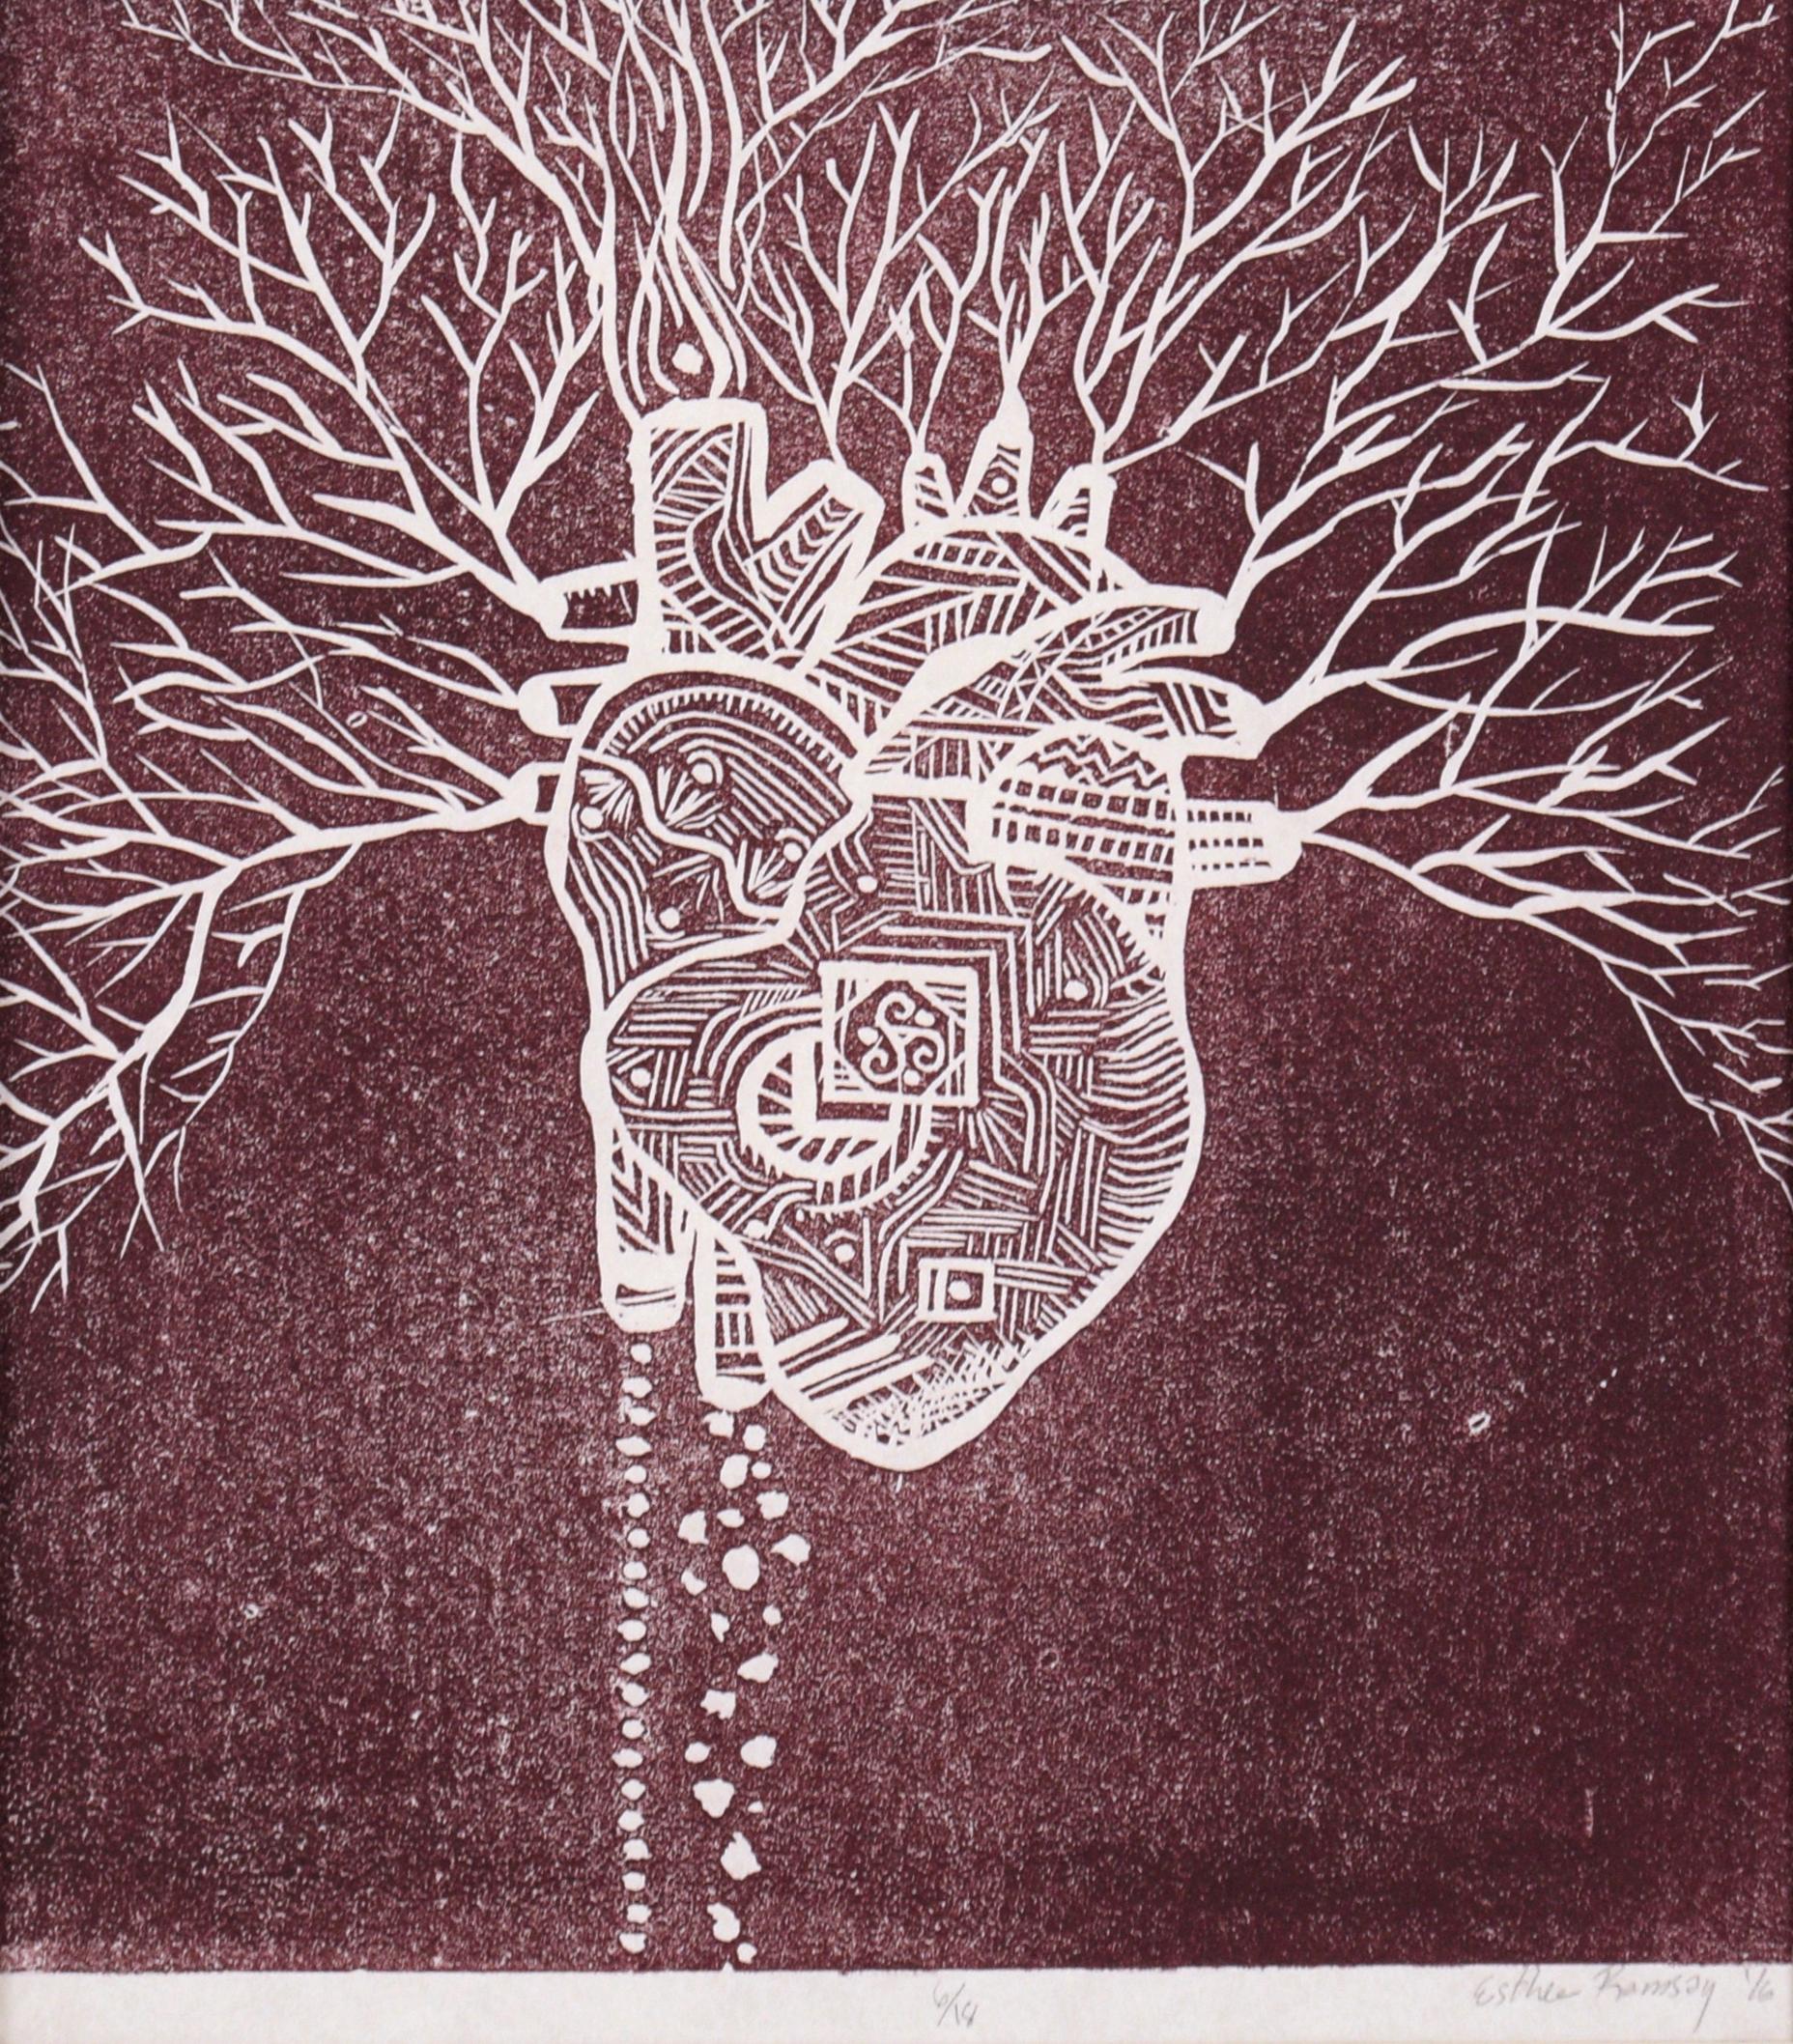 Branches of the Heart - Print by Esther Ramsay